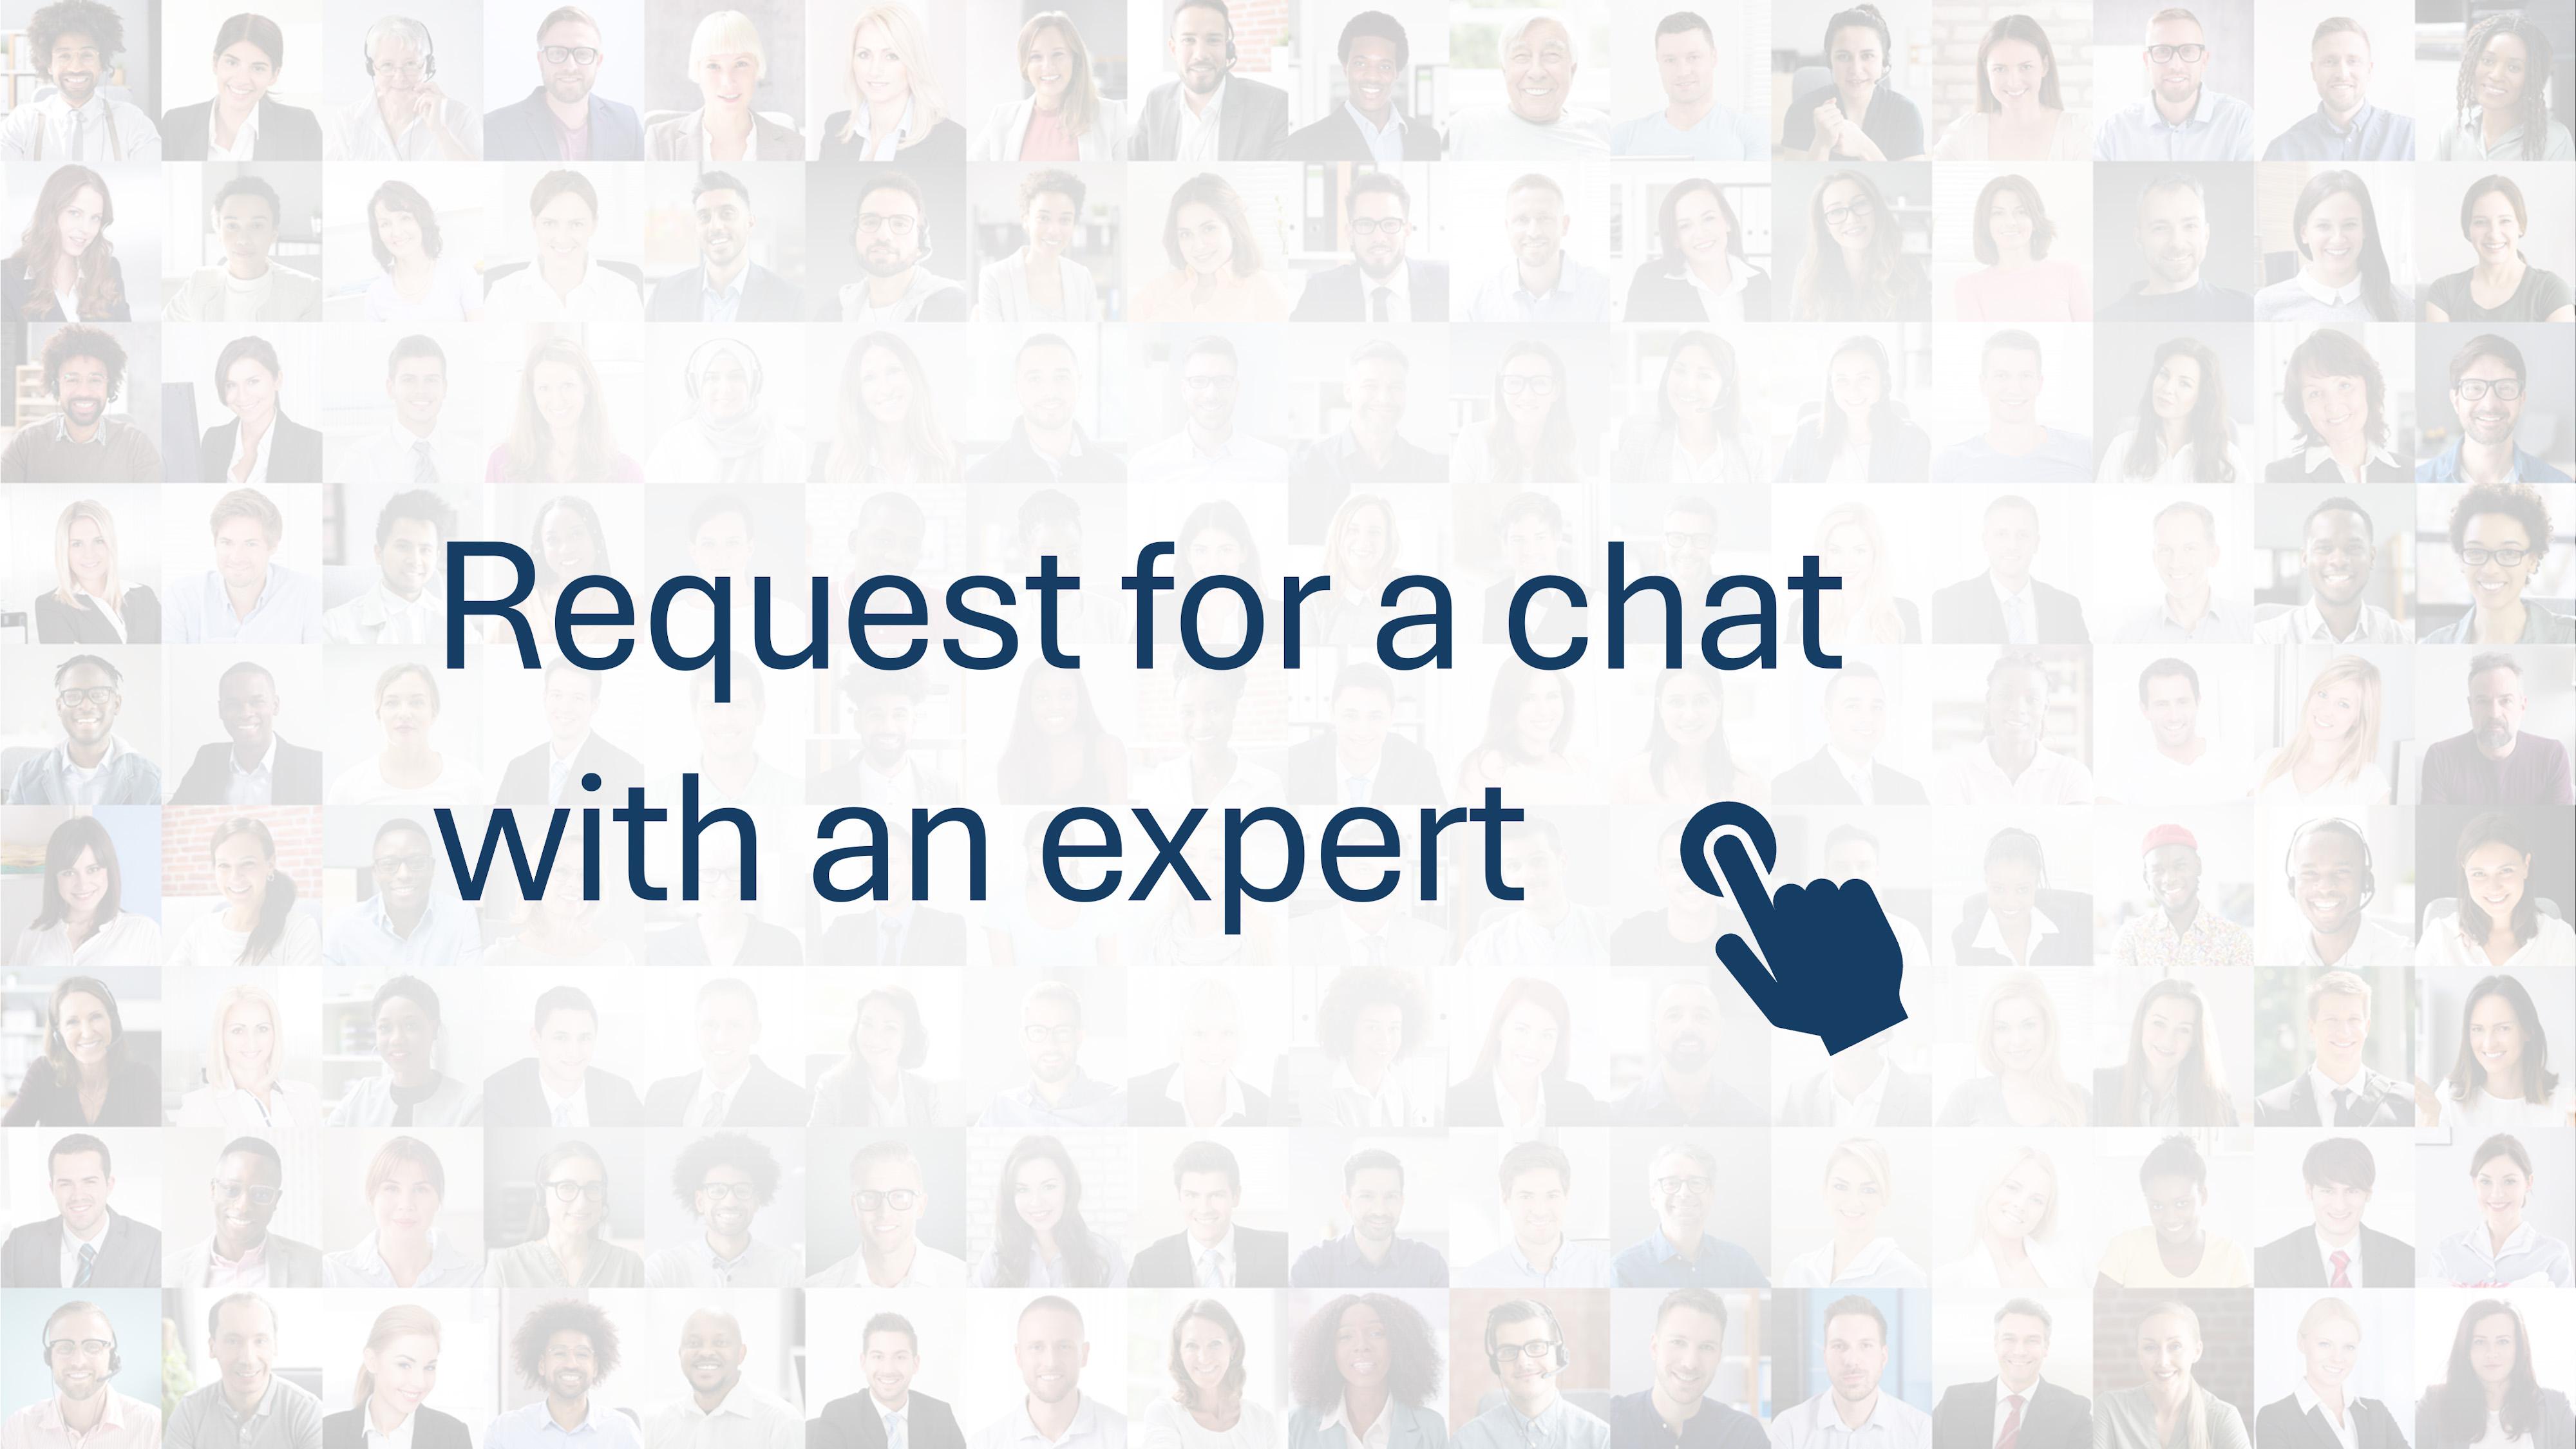 Request for a chat with an expert_edited